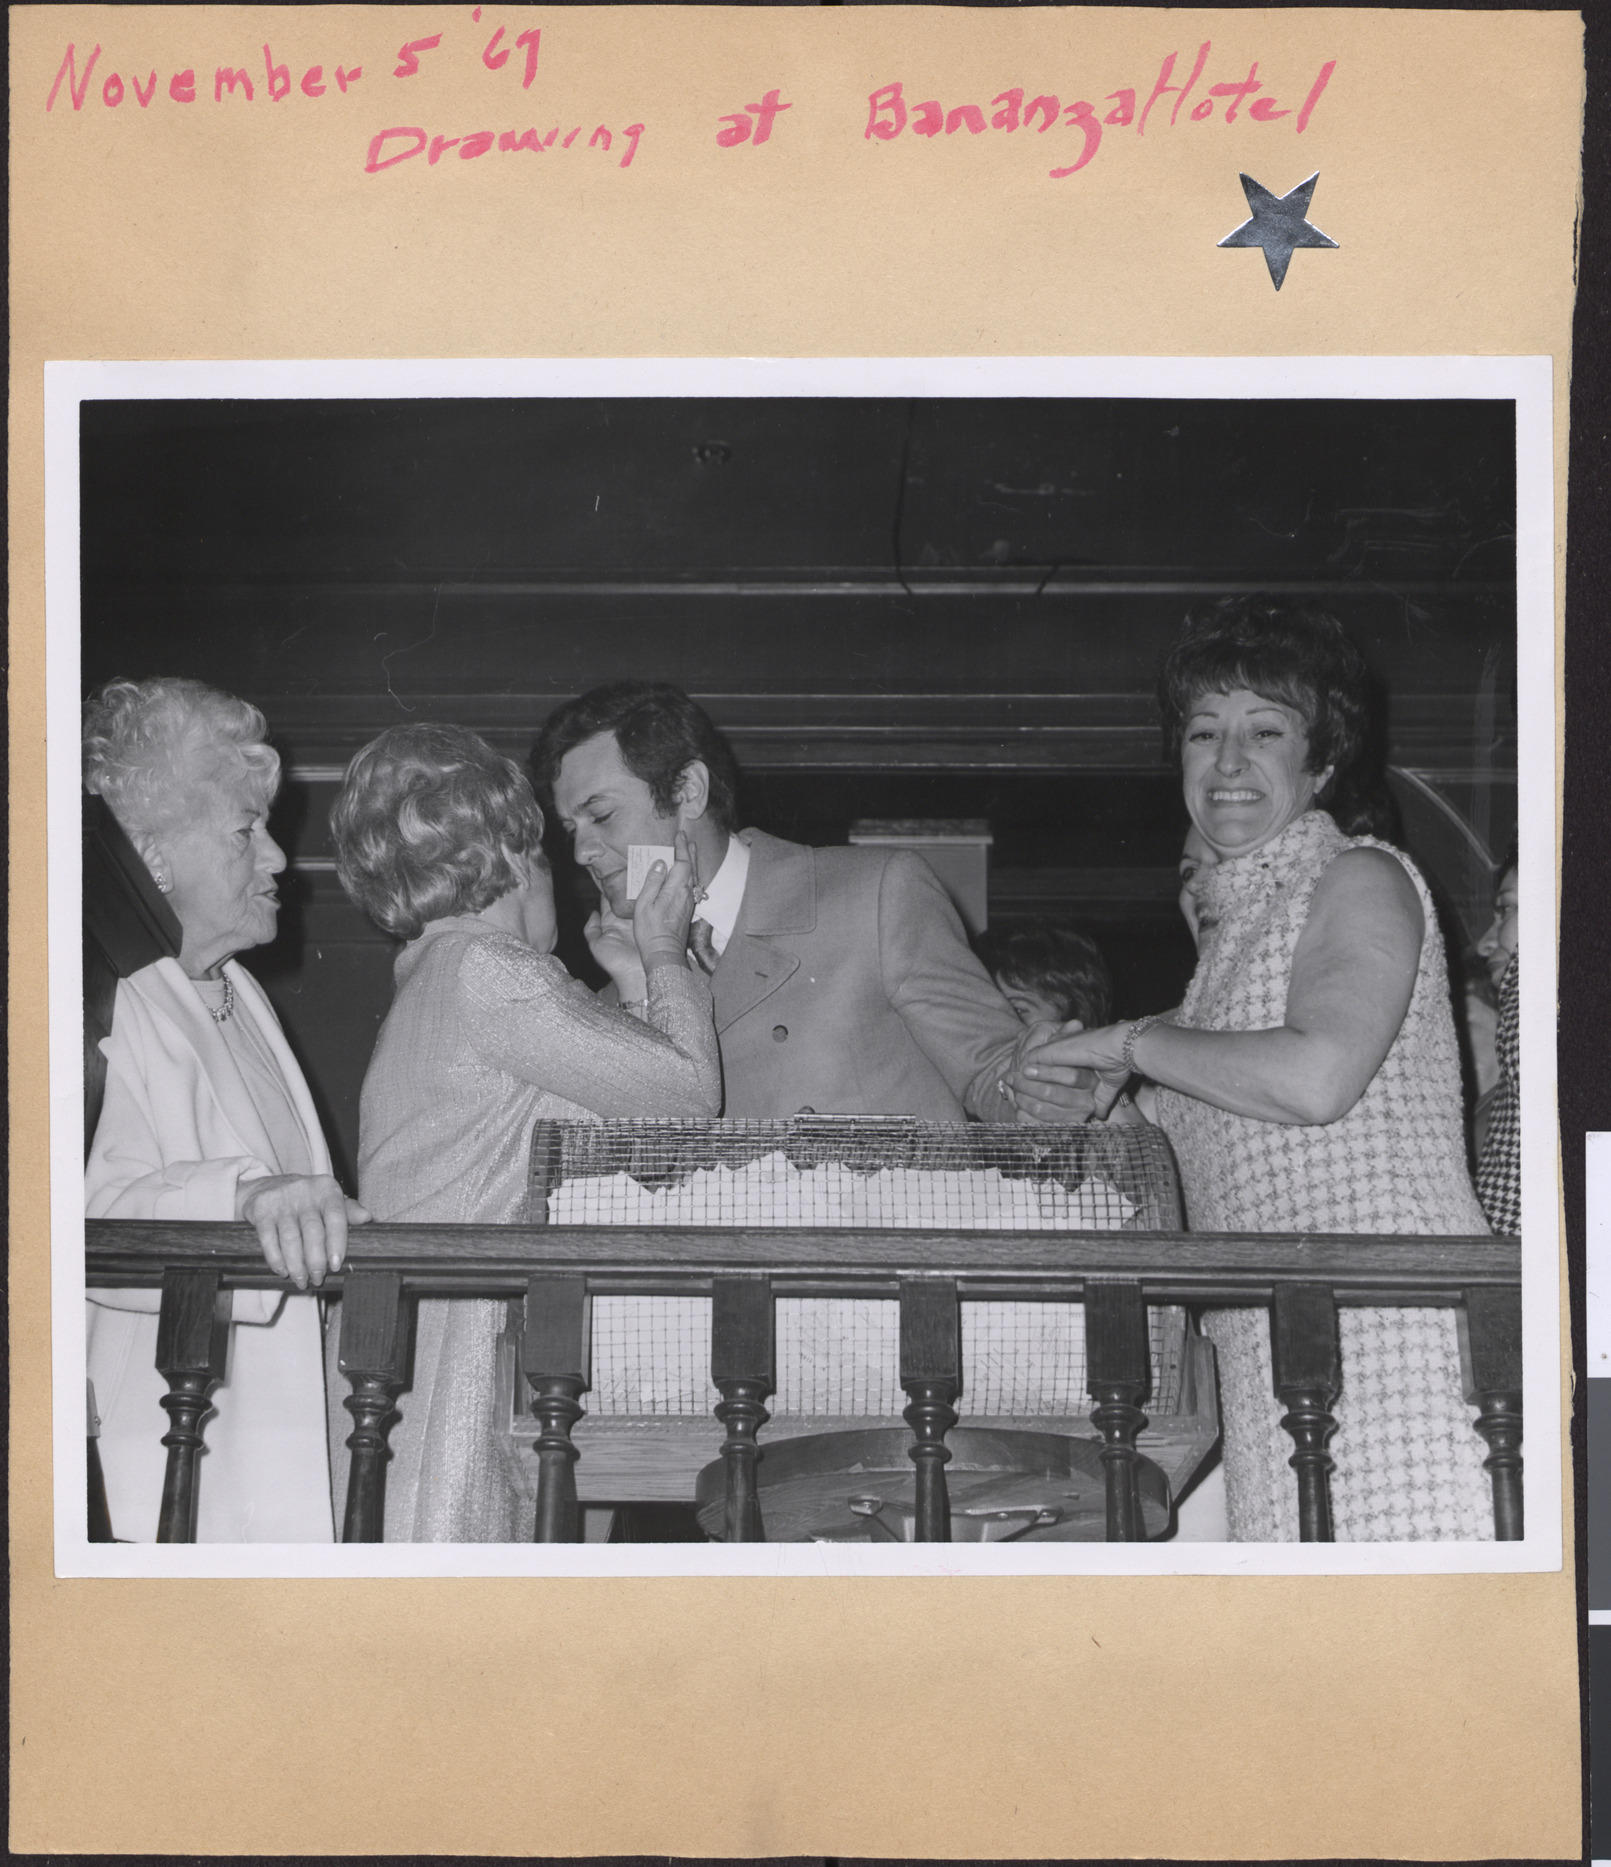 Cocktail Party, Bonanza Hotel: Photograph of Tony Curtis with Hadassah members drawing winning ticket, November 5, 1967